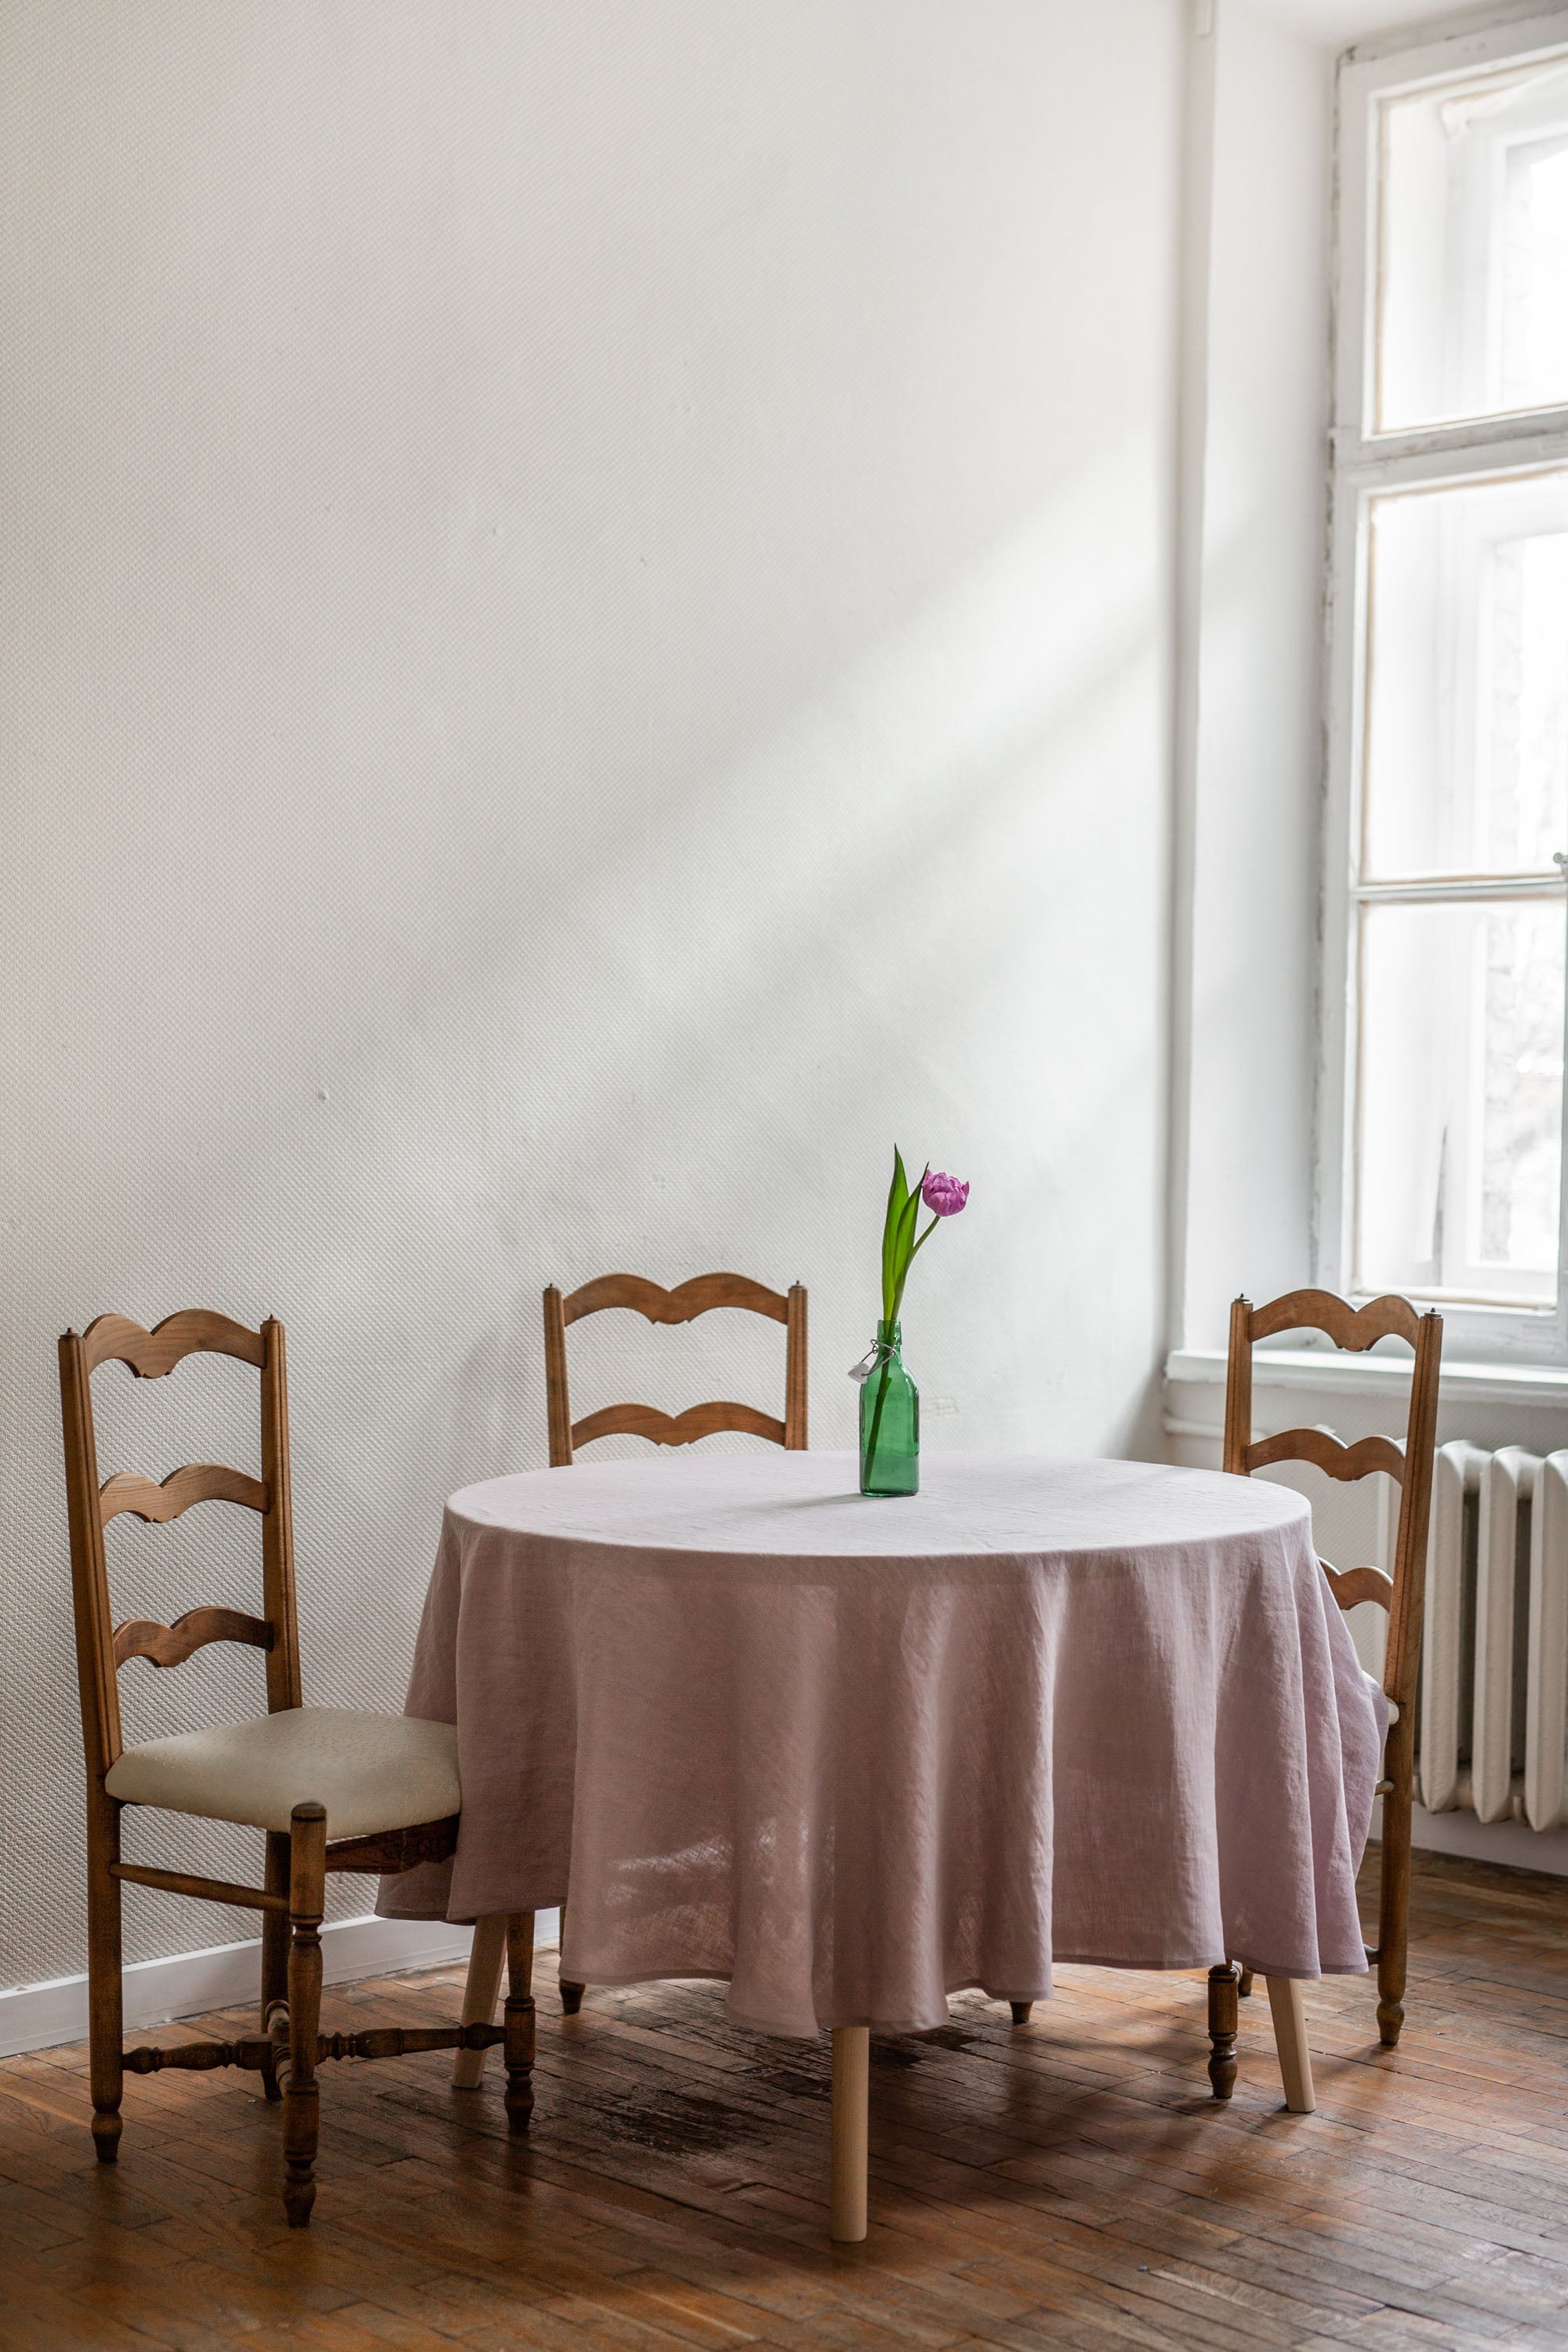 Cotton Candy Linen Round Tablecloth By AmourlInen